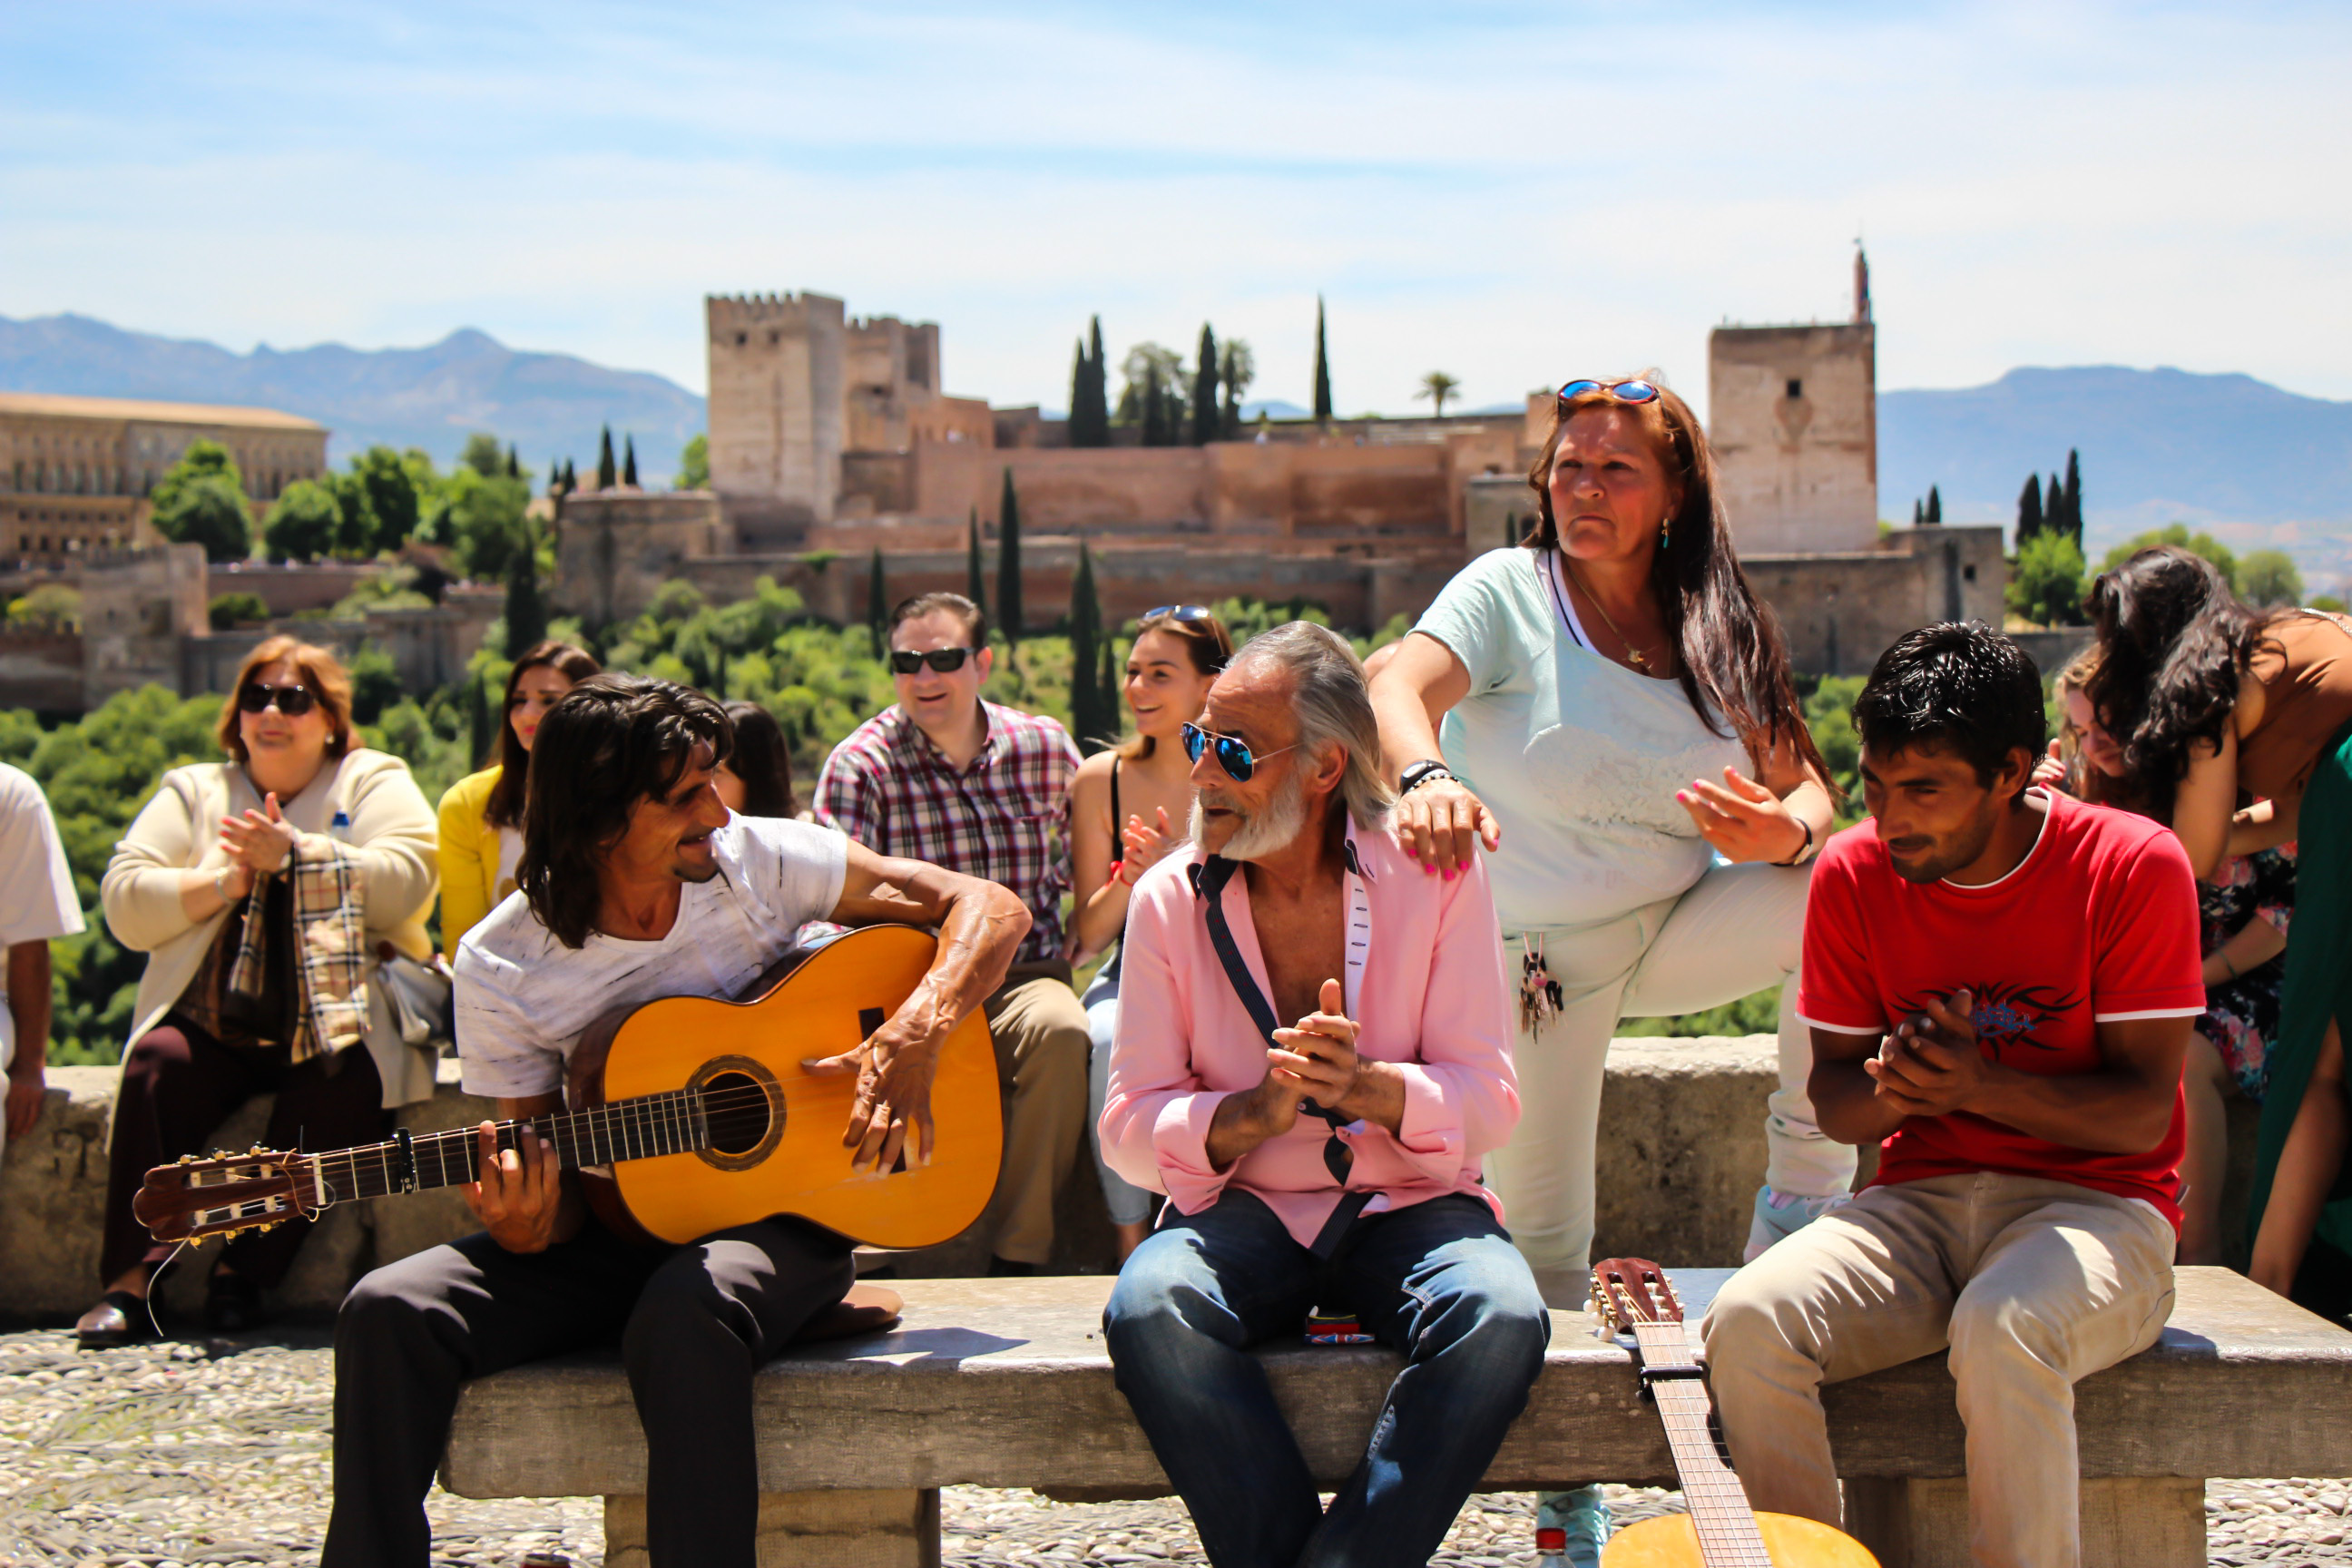 Gypsies gather daily in groups at the Mirador of San Nicolas and perform flamenco songs and passionate guitar playing. At the beginning, Flamenco only consisted of handclapping and singing, it was until the 19th century when the guitar was incorporated